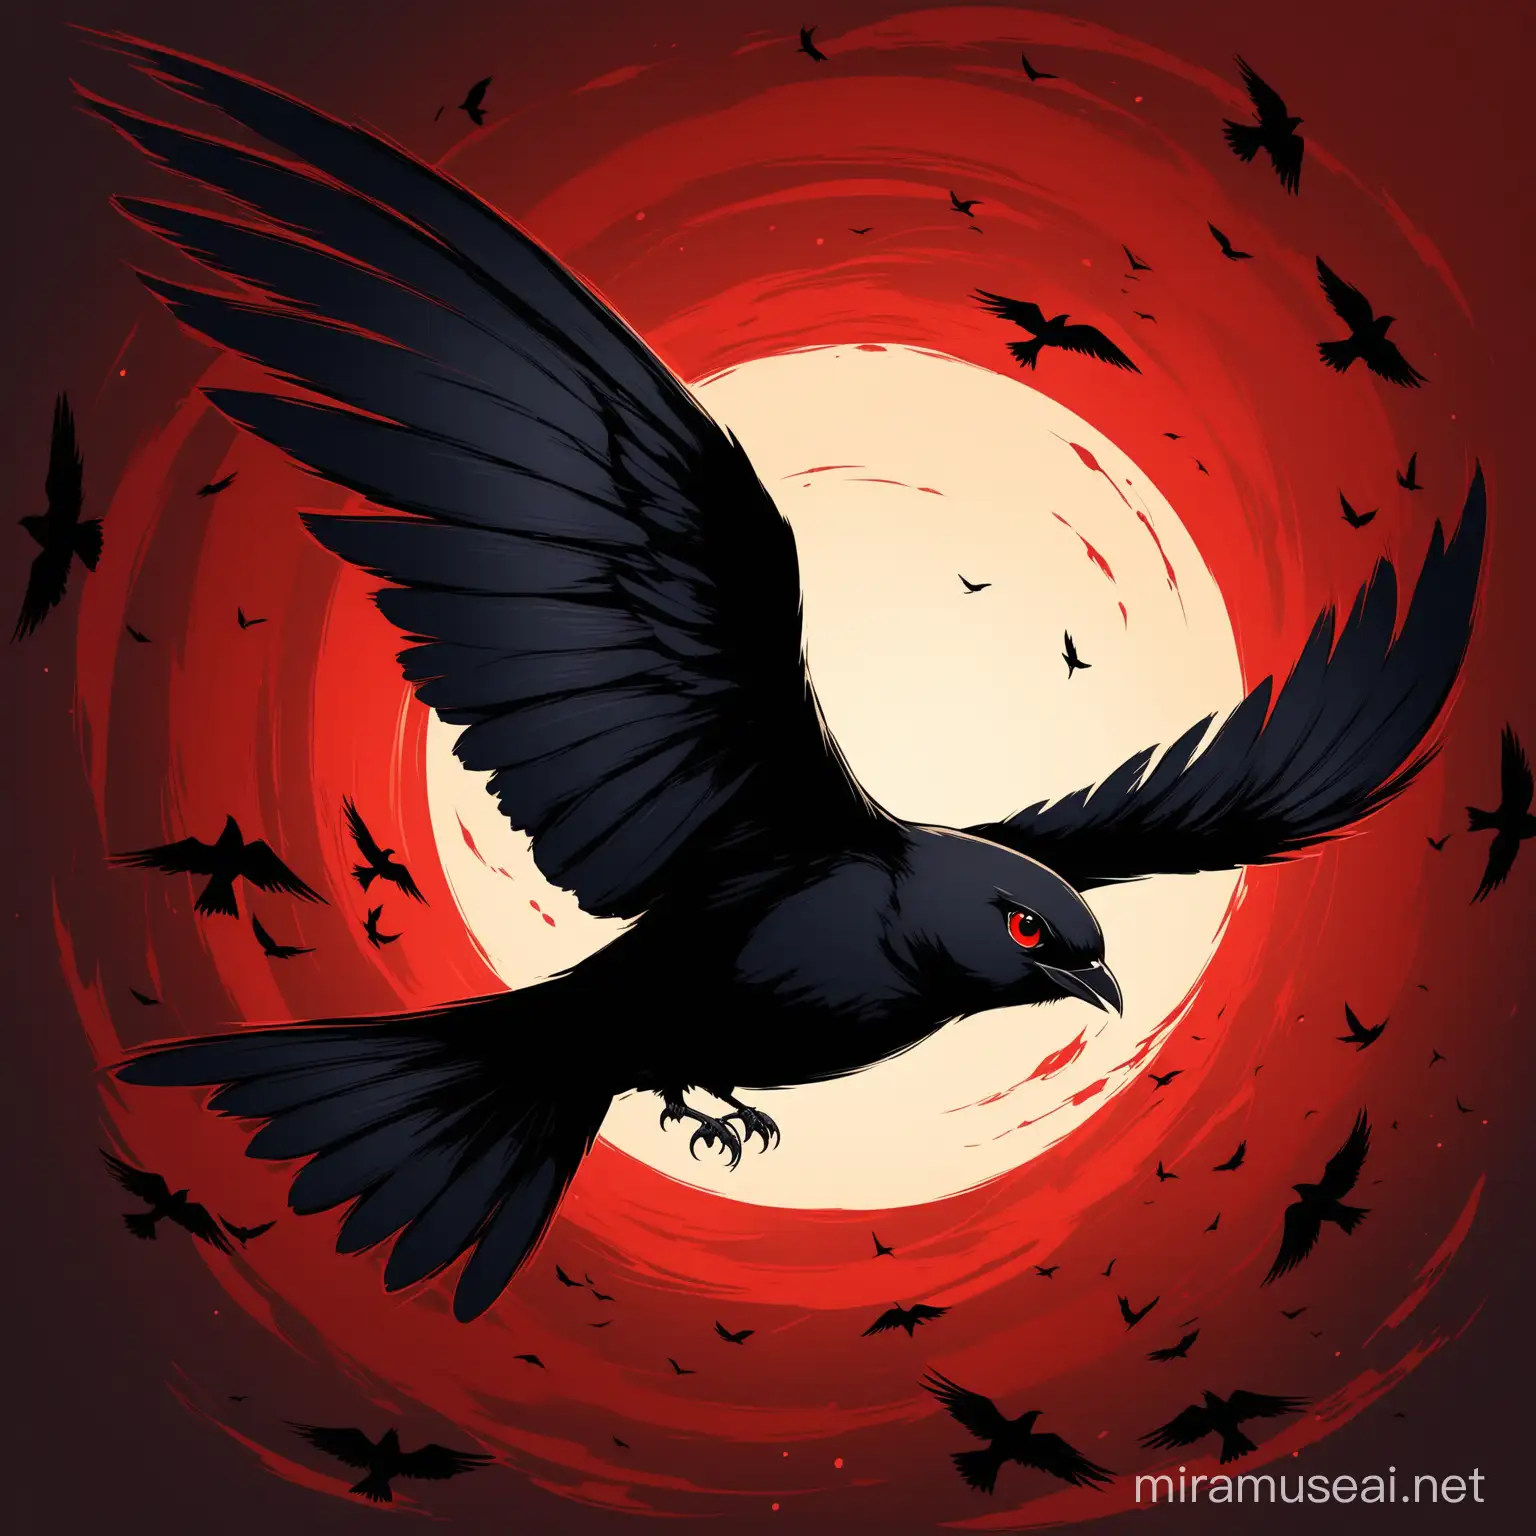 Mystical Black Swallow with Enigmatic Red Eyes Soaring in Darkness